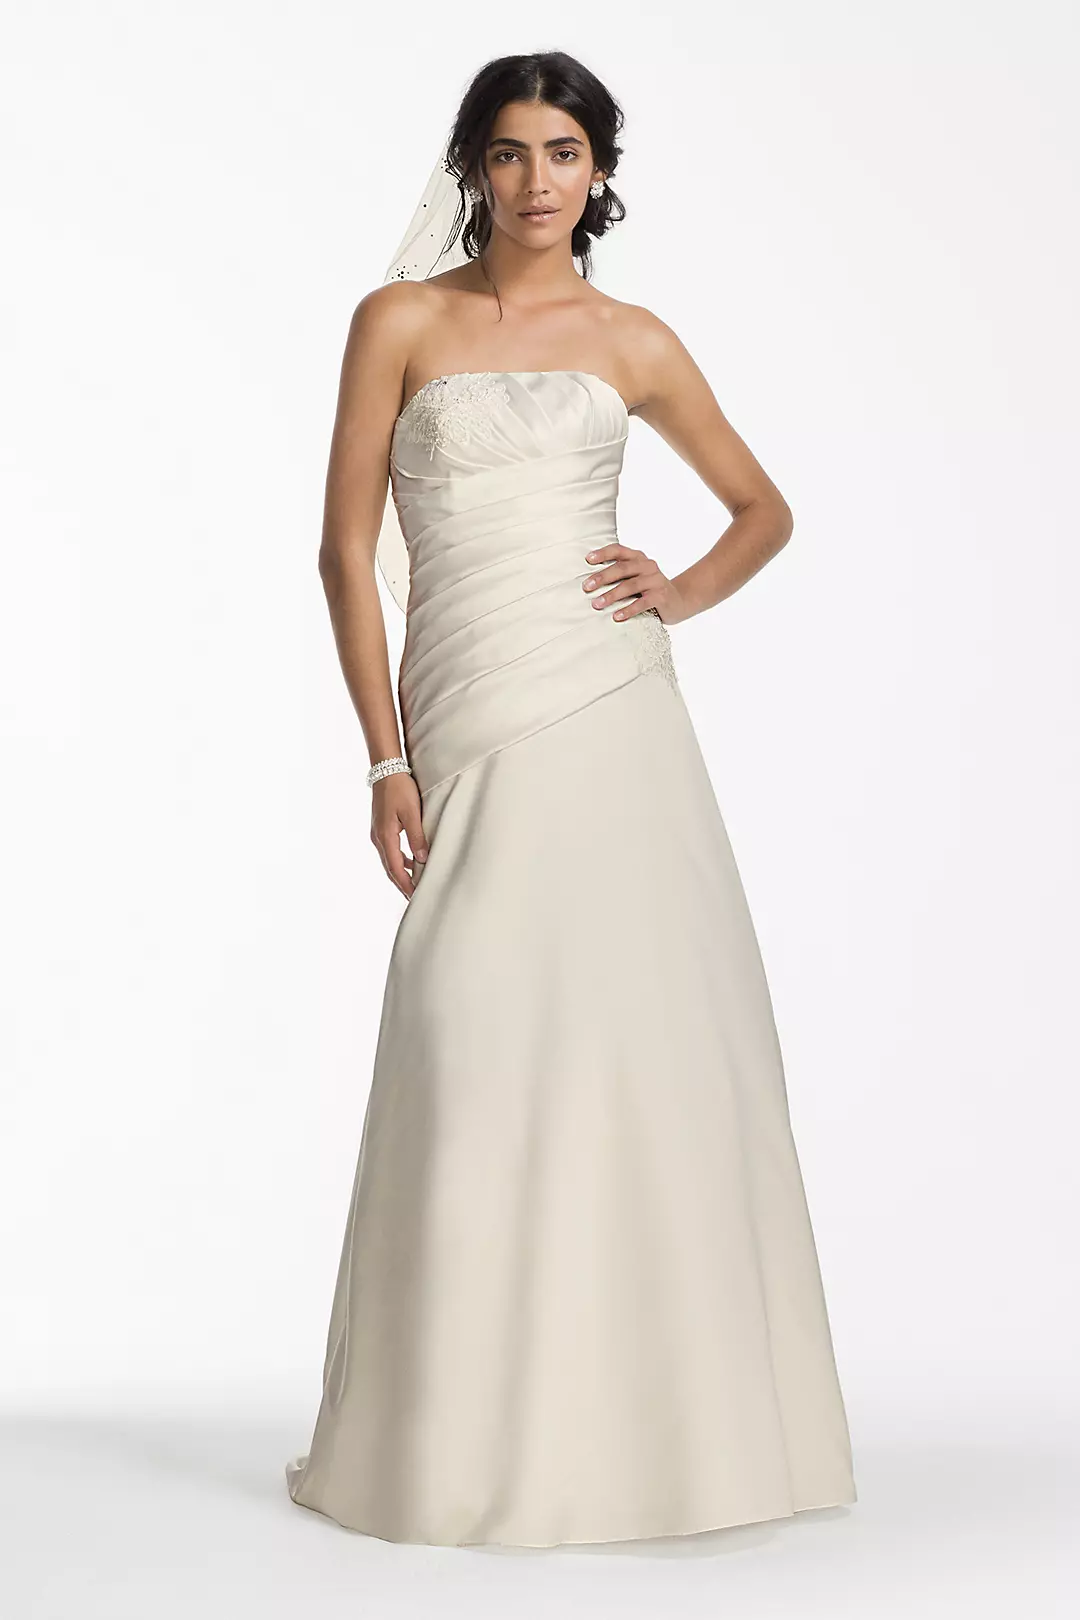 Satin A-line Wedding Dress with Ruched Bodice  Image